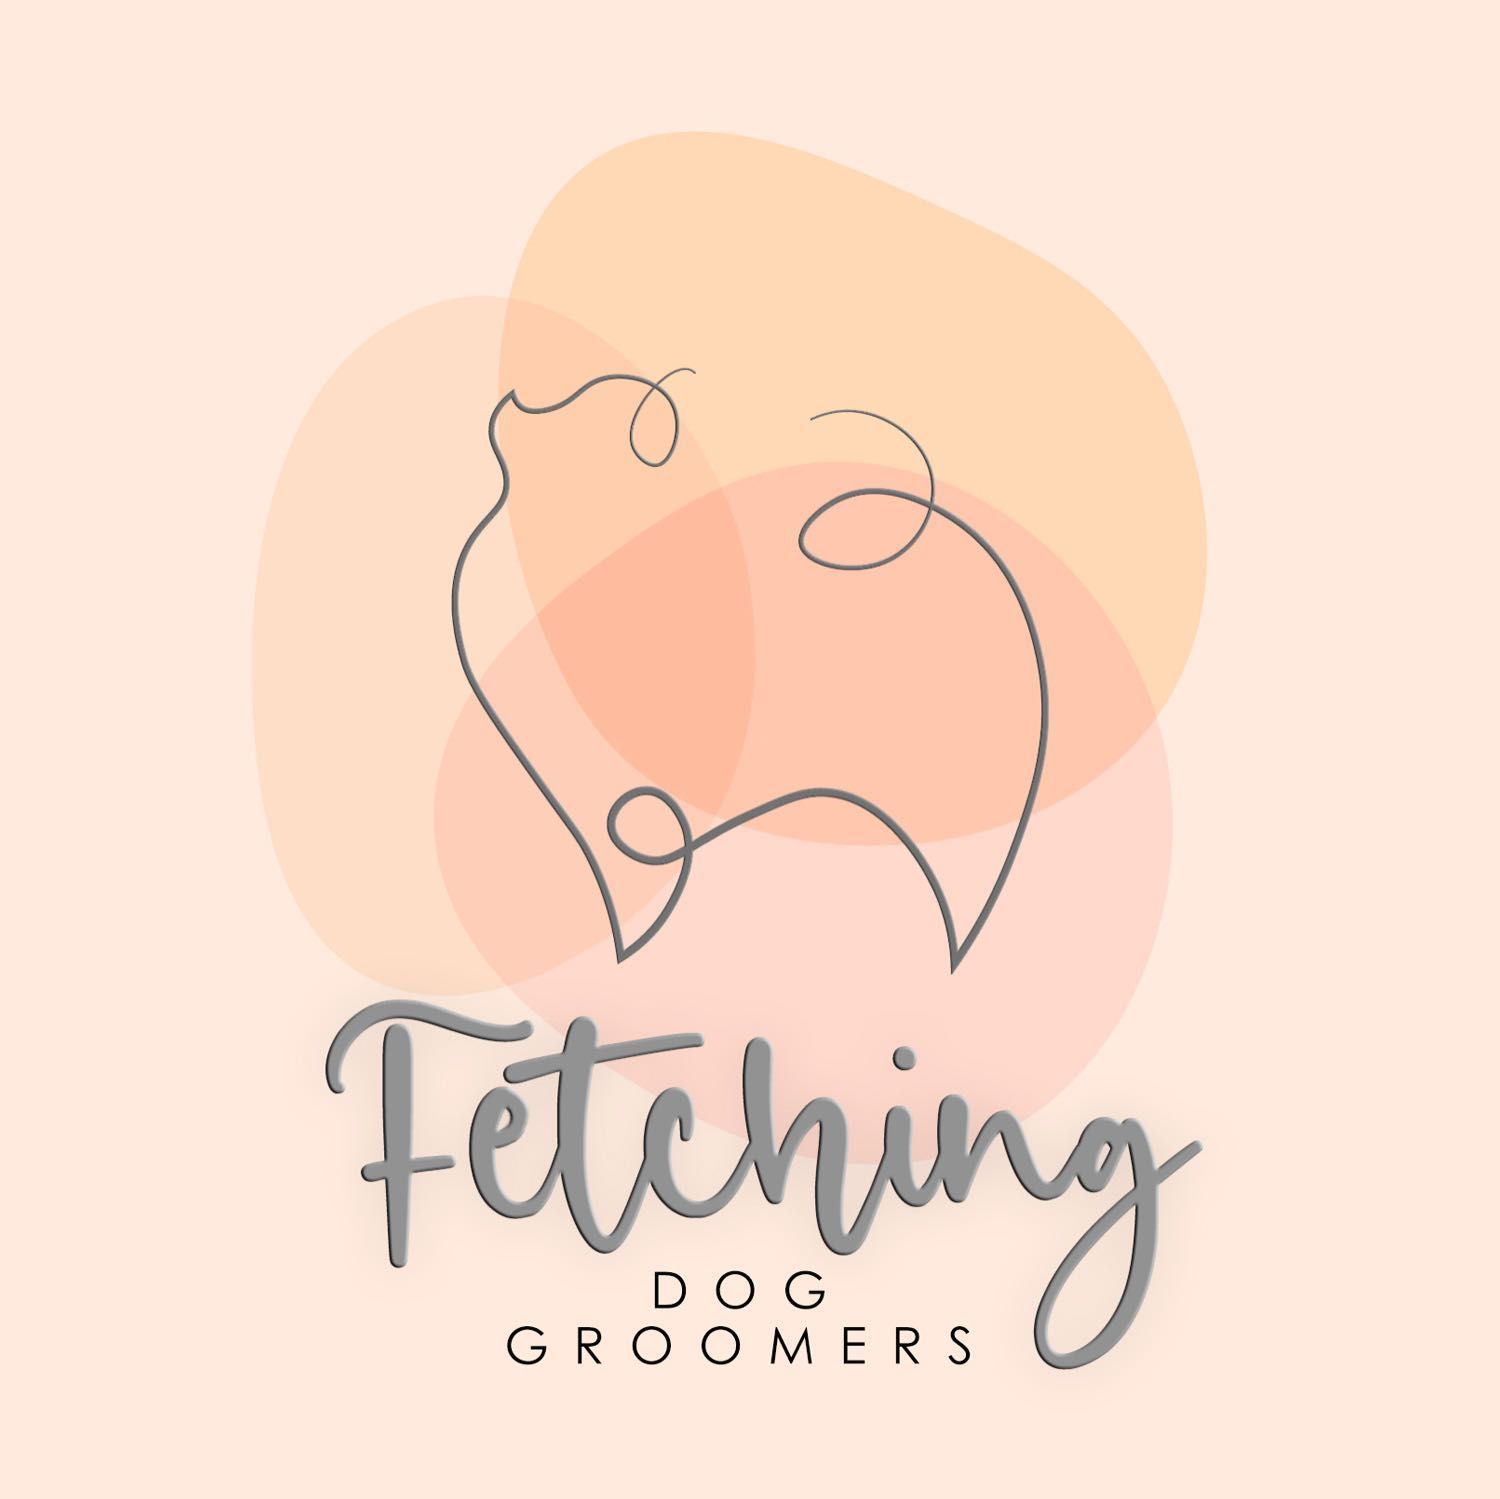 Fetching Dog Groomers, 16 Newlands Road, G71 5QP, Glasgow